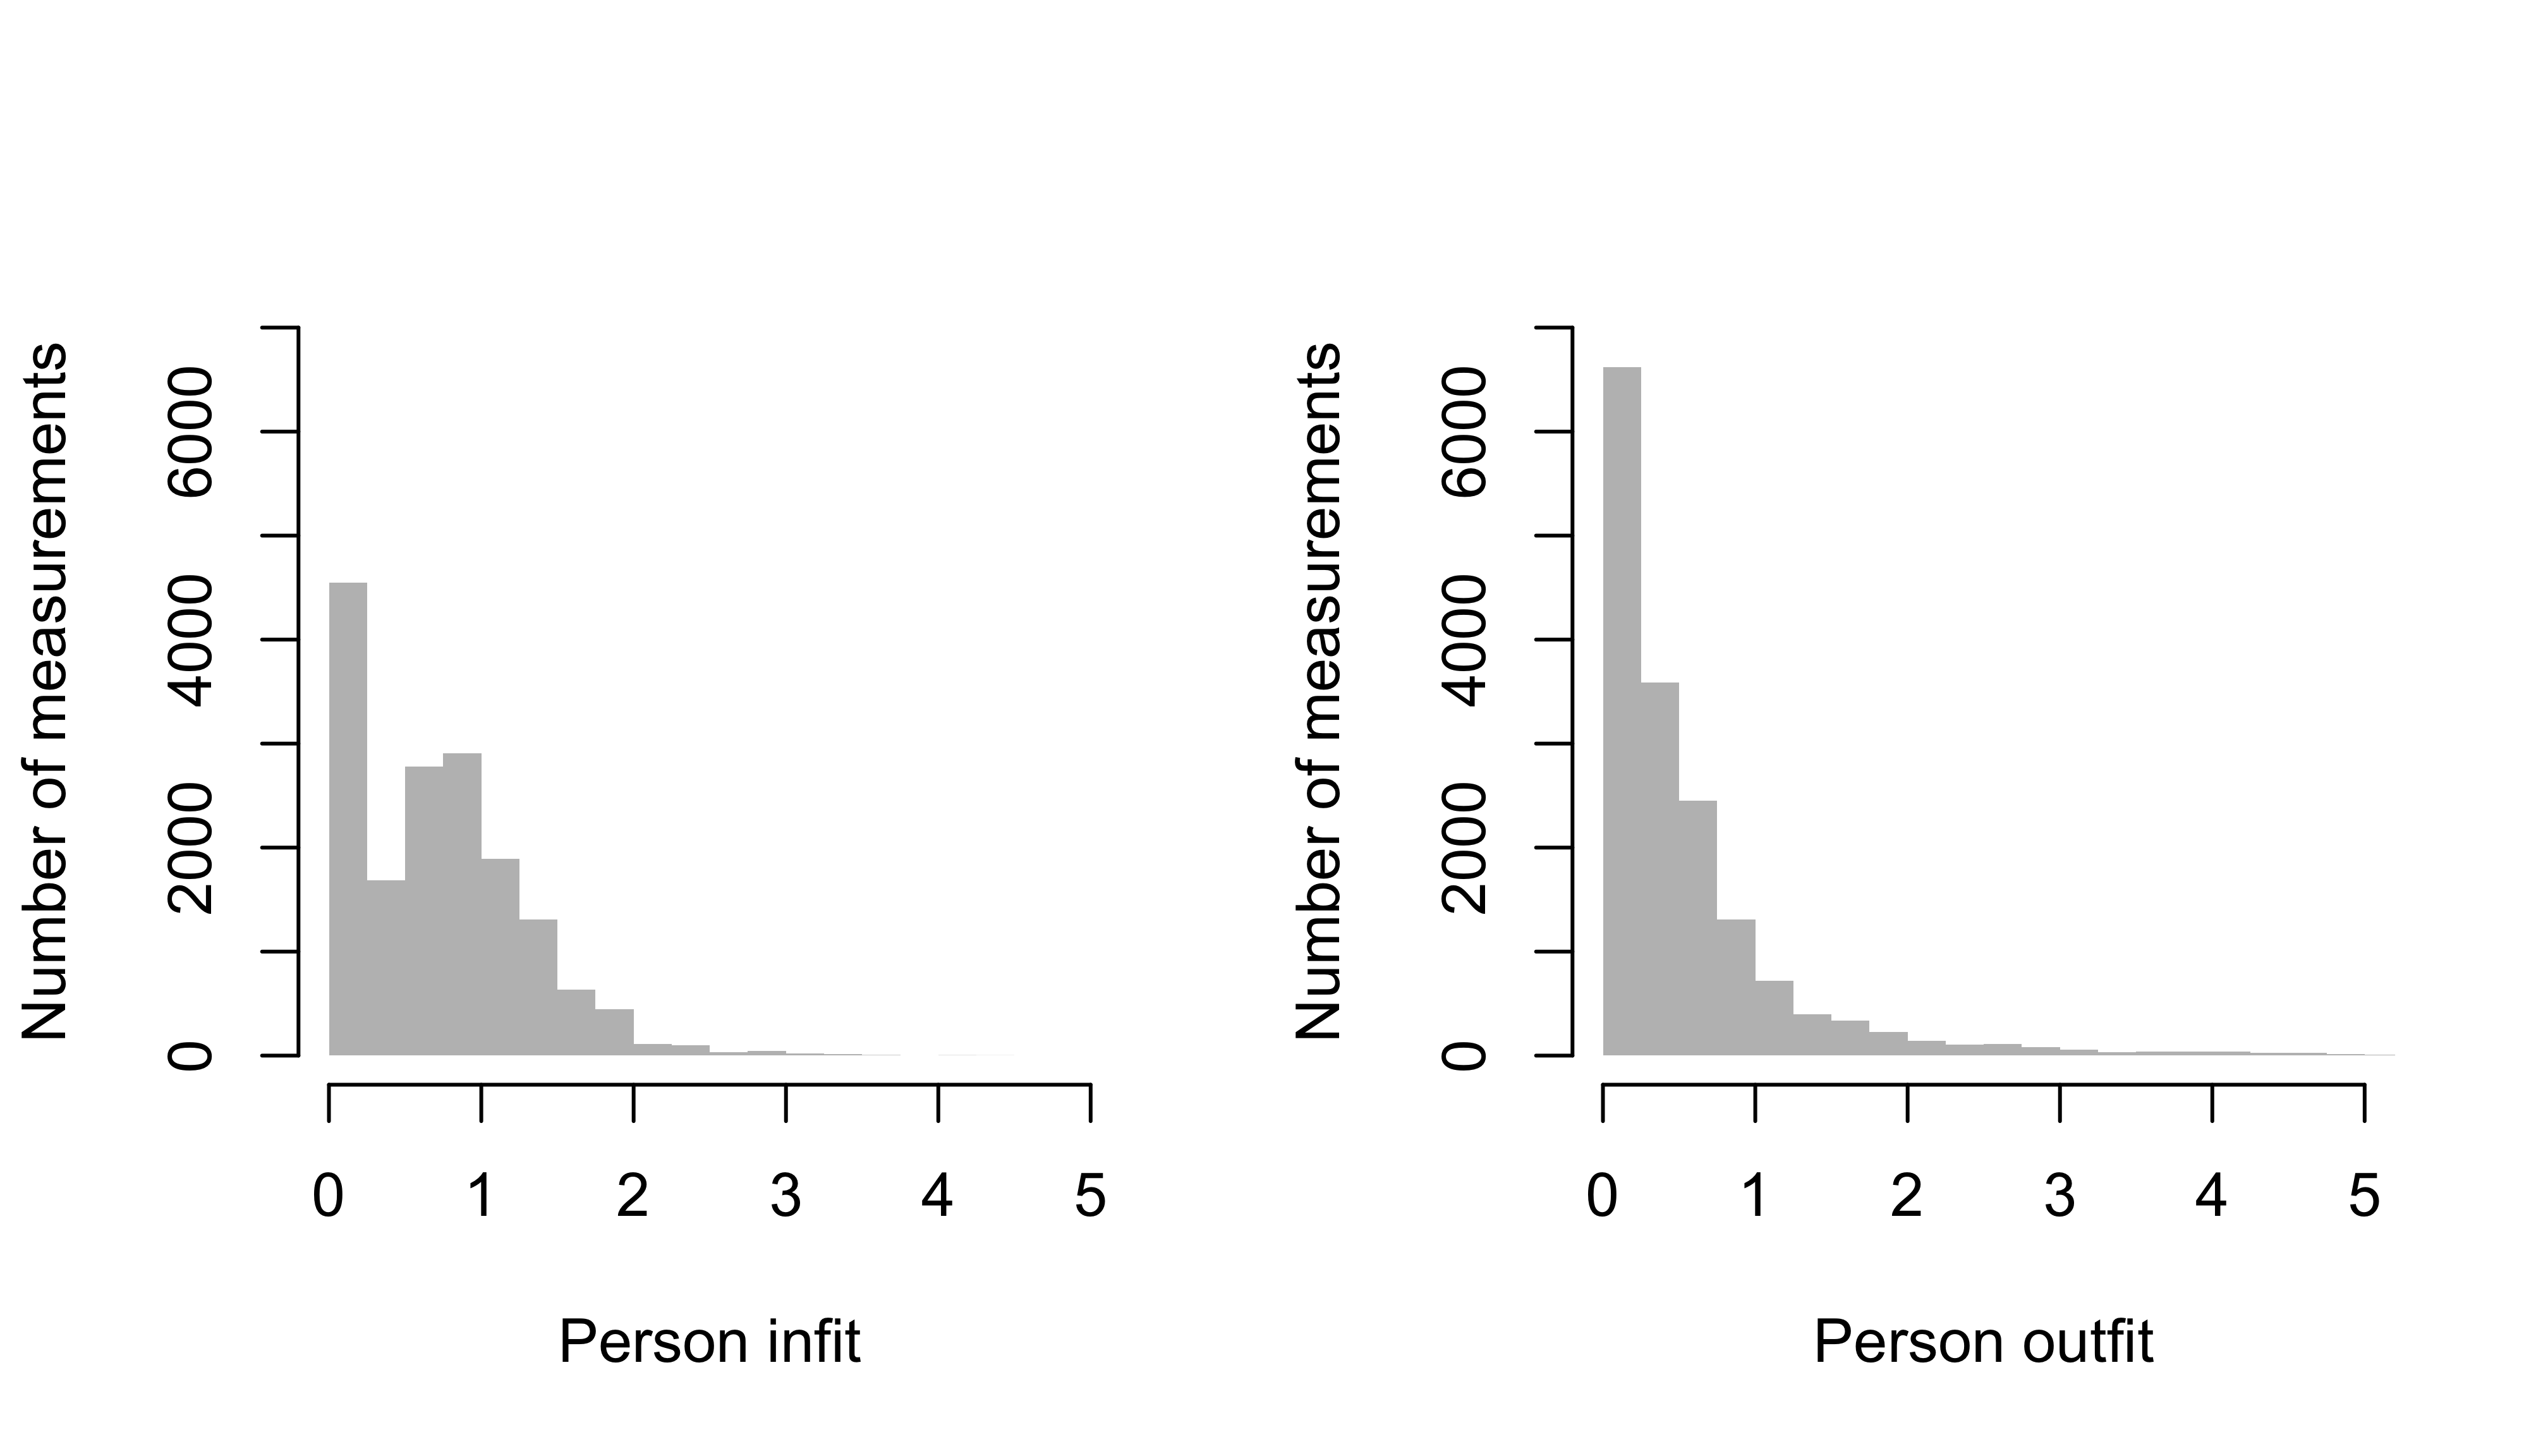 Frequency distribution of person infit (left) and person outfit (right) for 16538 measurements of the DDI (SMOCC data).